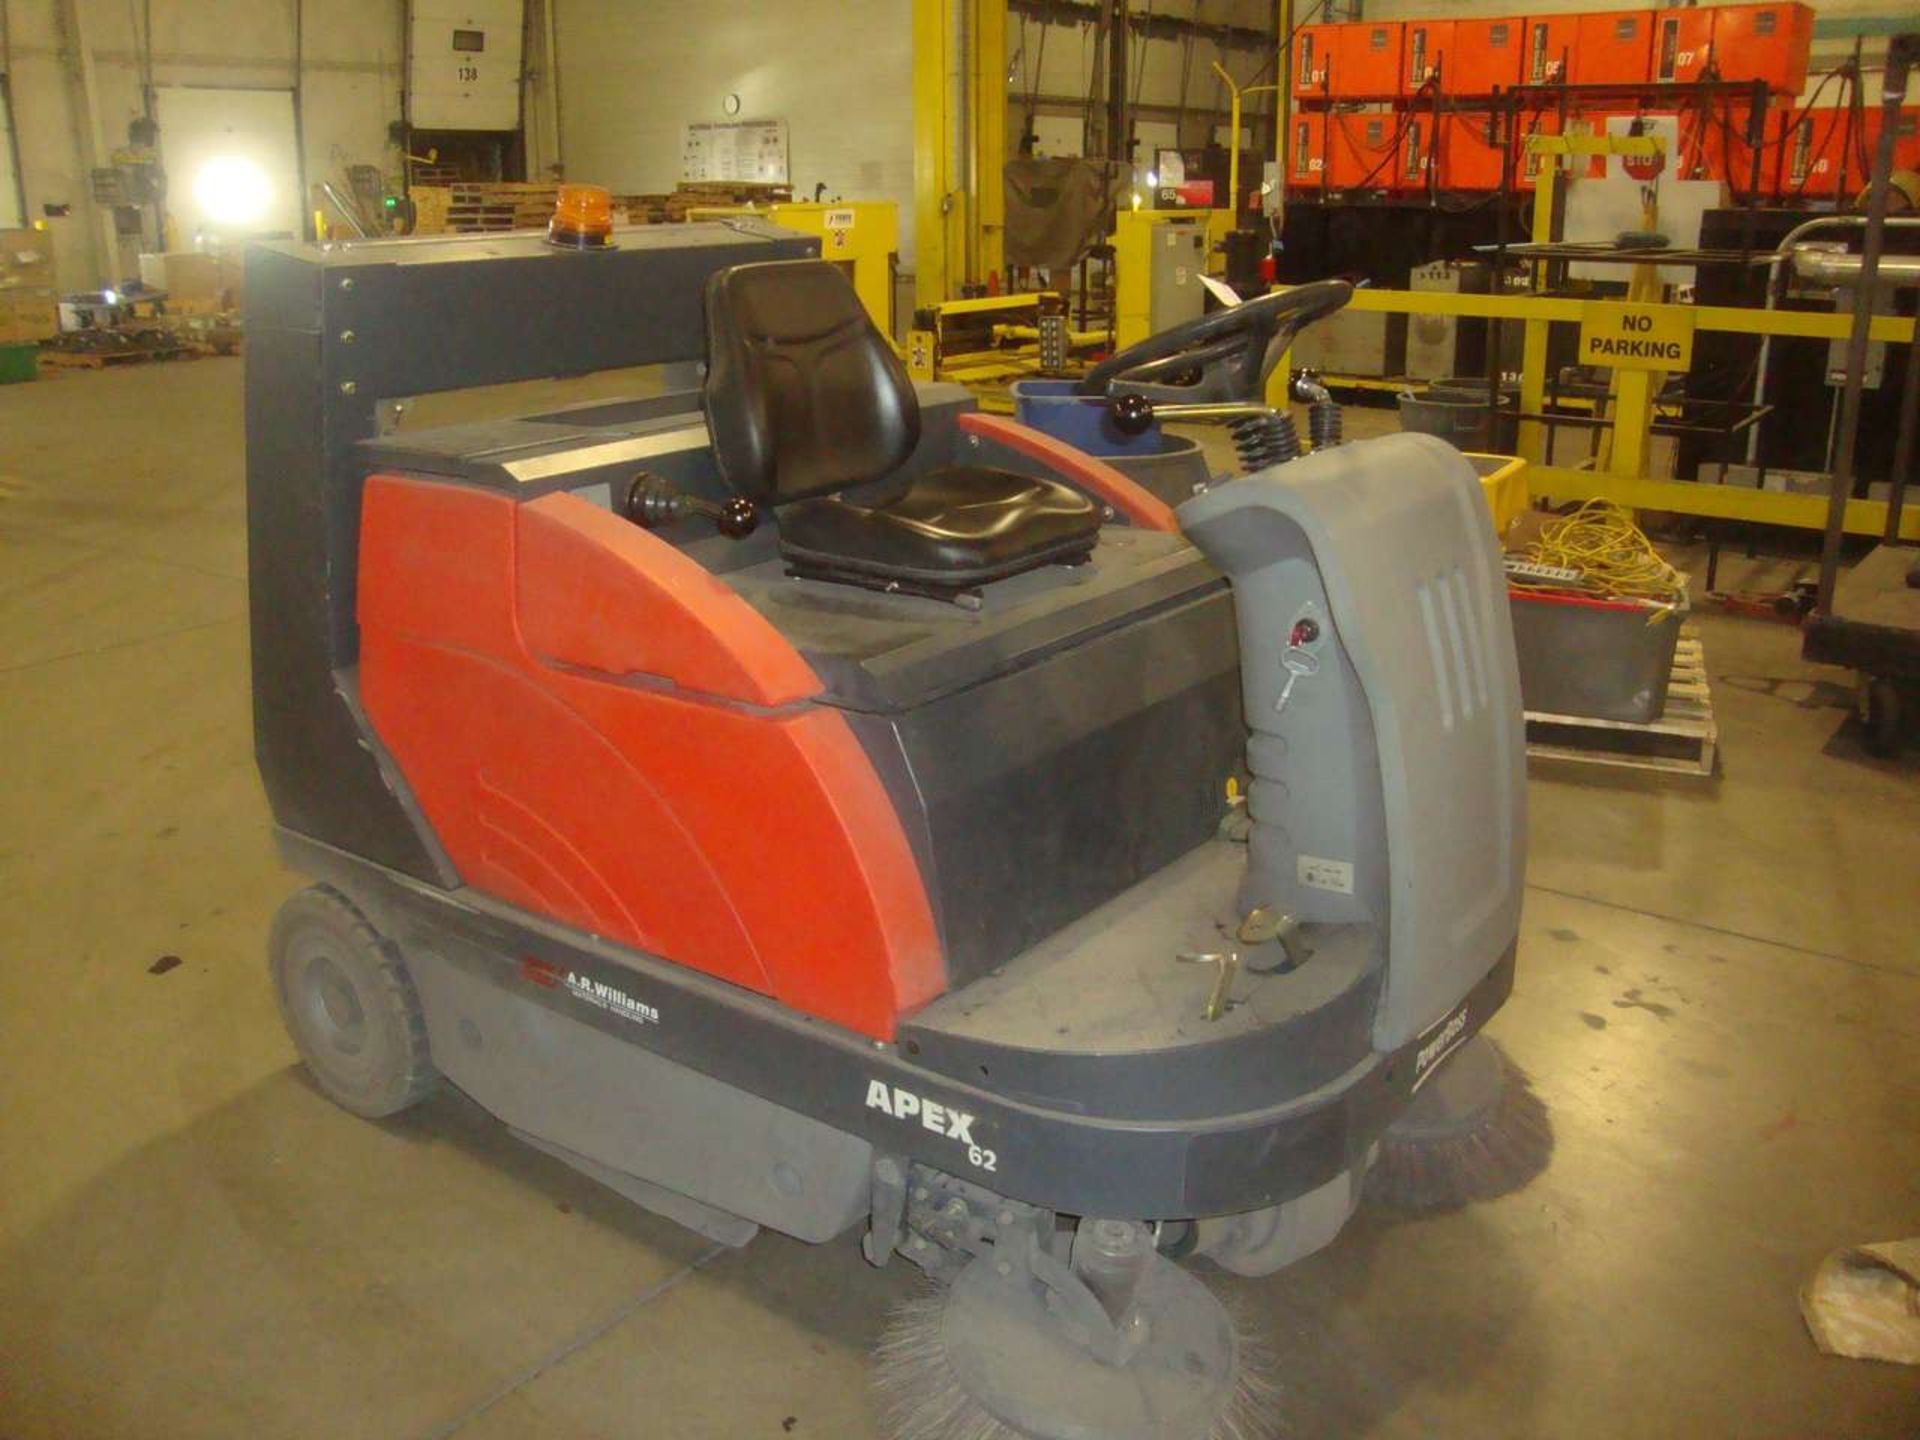 Apex 62 Power Boss Floor Sweeper w/ Charger